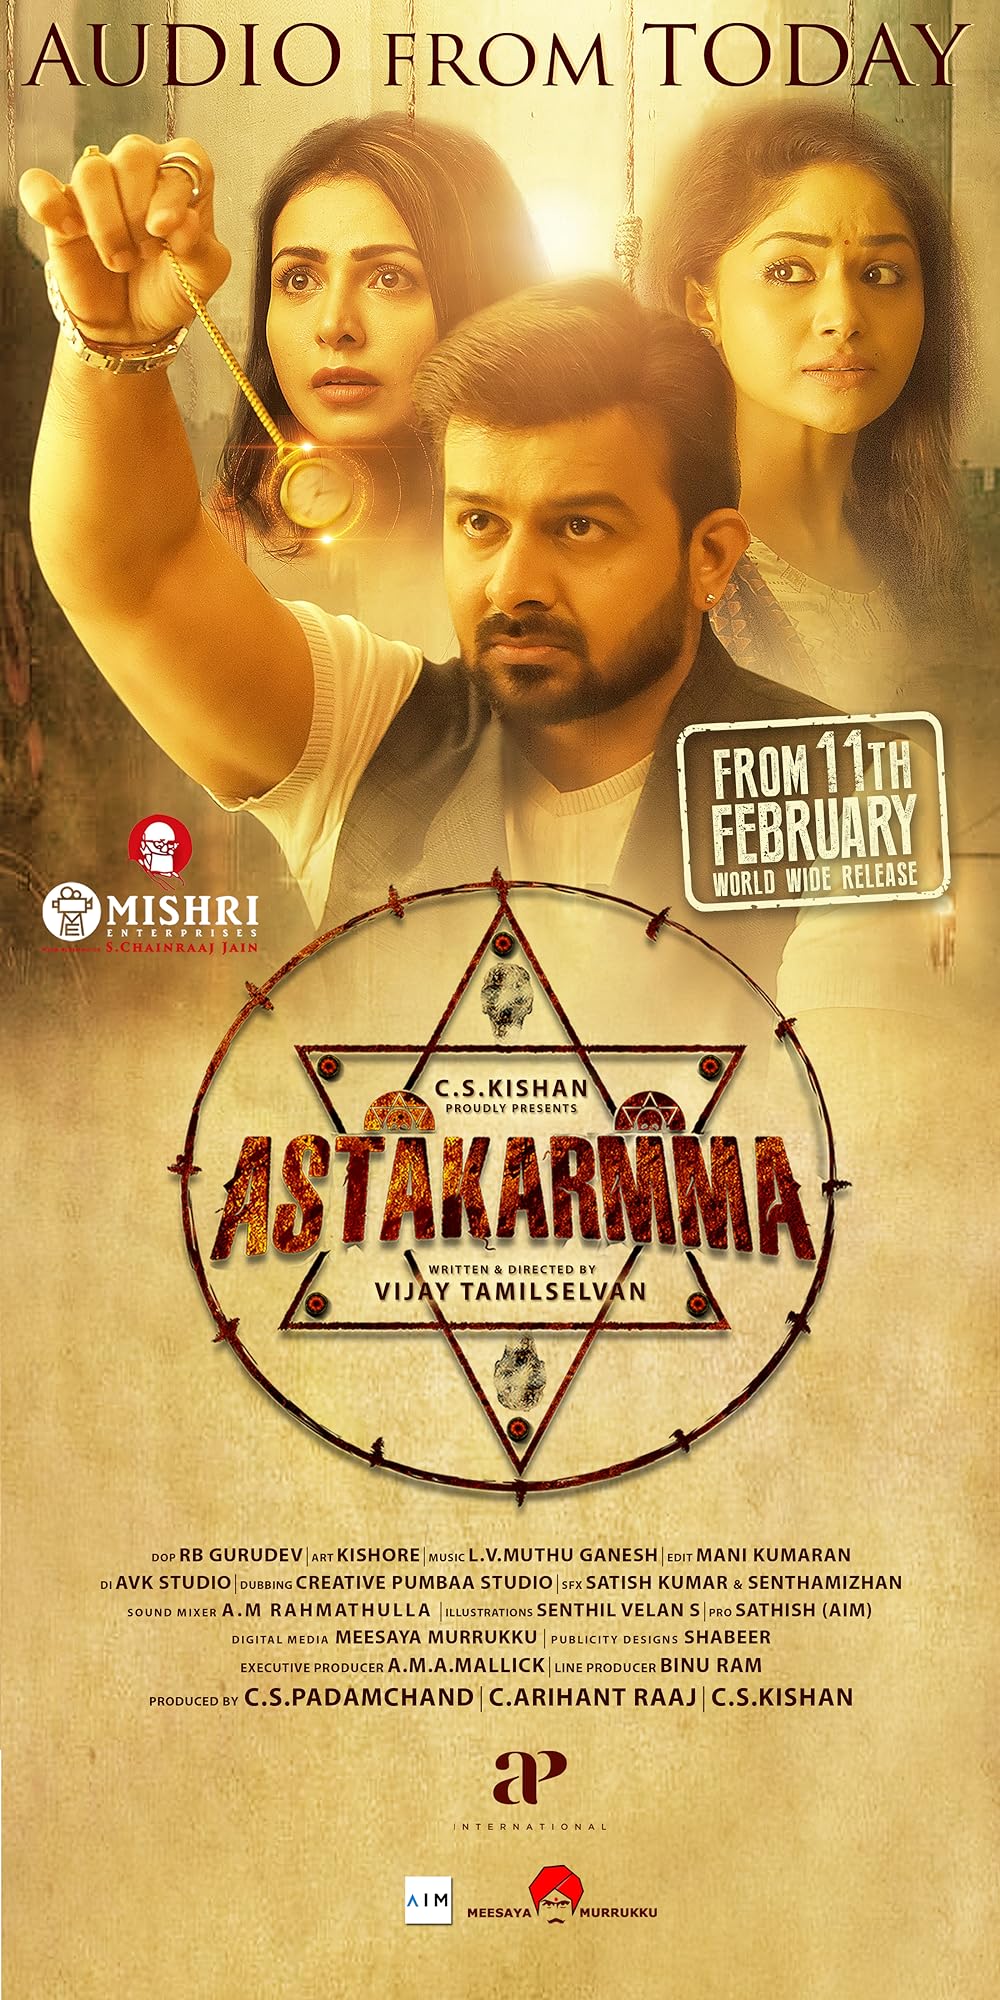 Download Astakarmma (2022) Hindi Dubbed Movie WEB – DL || 480p [300MB] || 720p [780MB] || 1080p [1.4GB]